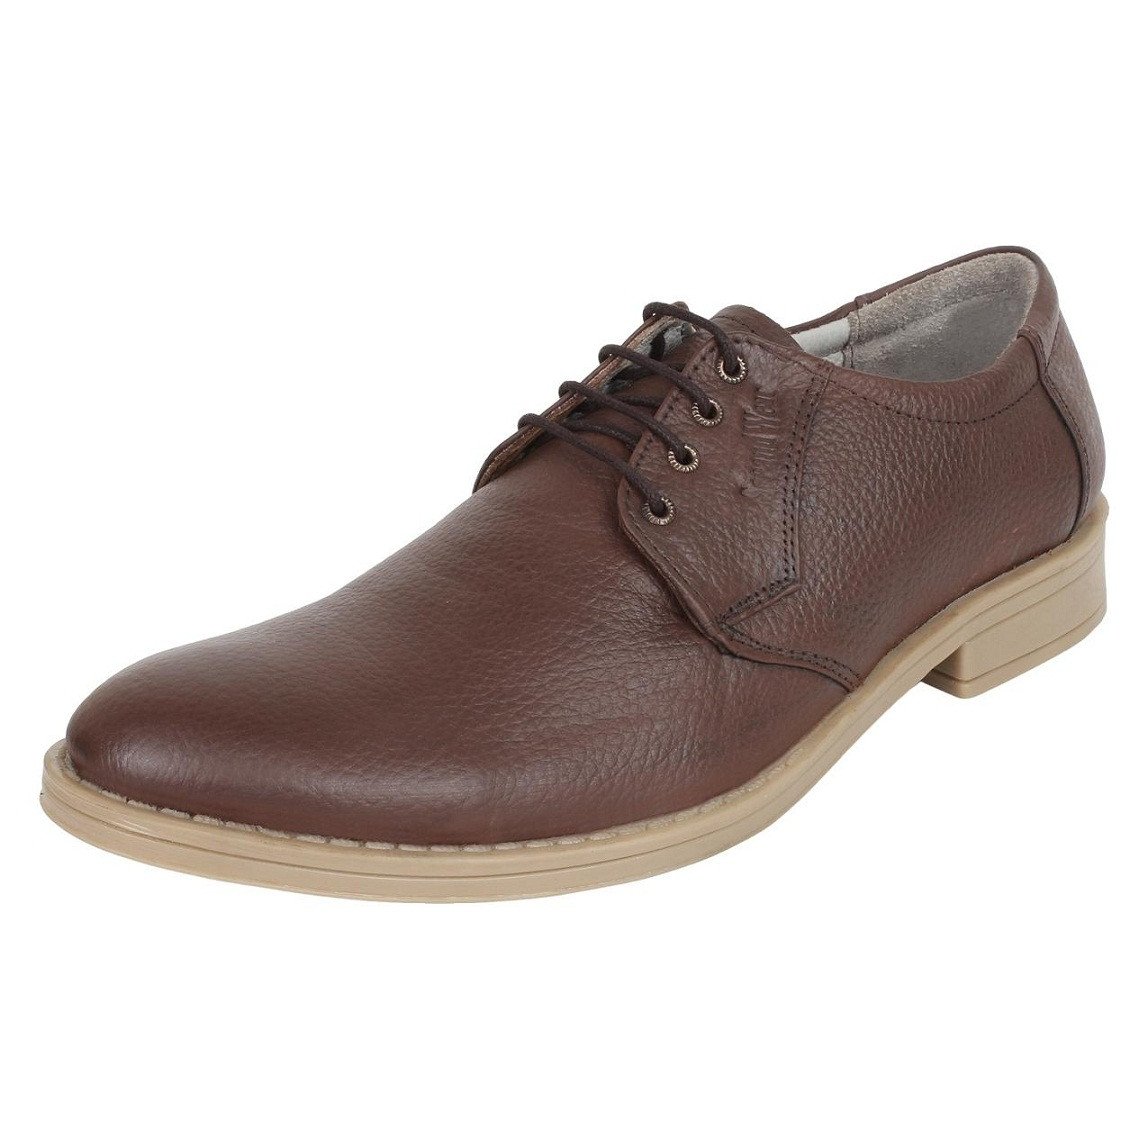 SeeandWear Formal Shoes For Men. Branded Leather Shoes Brown Colour - Minor Defect - SeeandWear